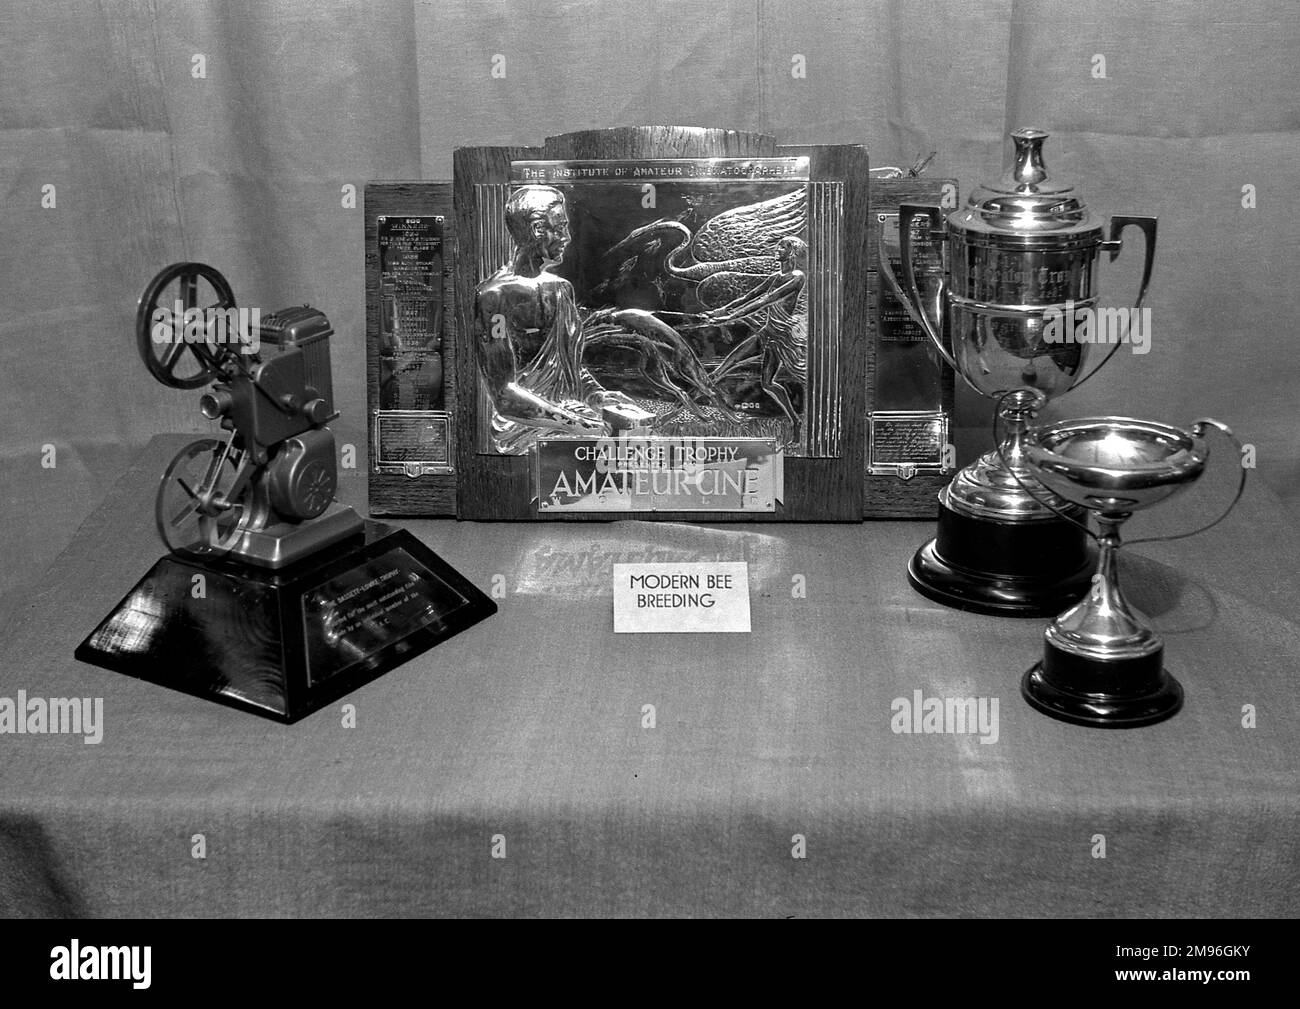 Various trophies on display.  The notice reads: Modern Bee Breeding, but the large trophy at the centre is for Amateur Cinematography, and the one of the left incorporates a film projector with two reels. Stock Photo